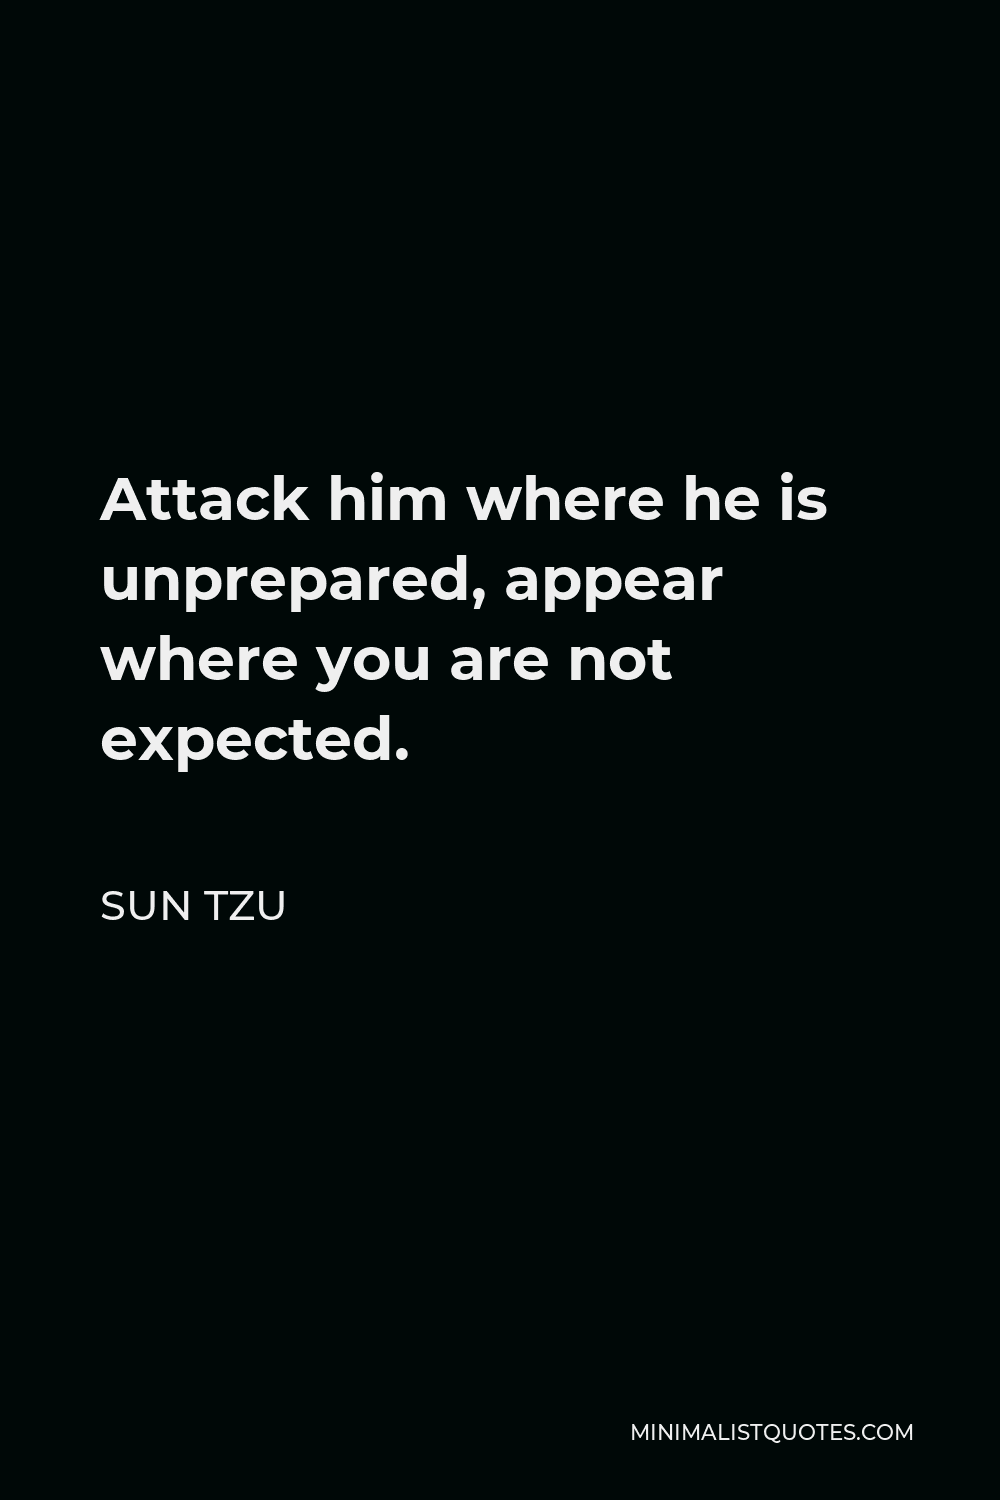 Sun Tzu Quote - Attack him where he is unprepared, appear where you are not expected.